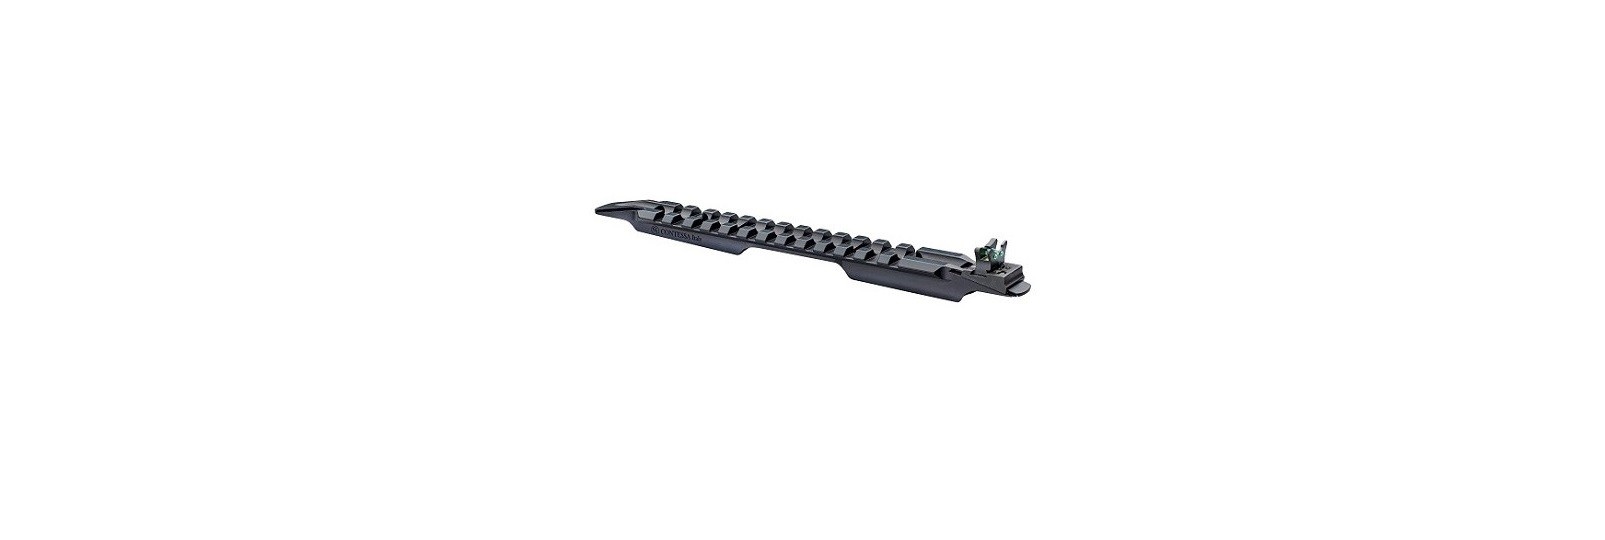 Lever Action Boarbuster Picatinny rail base